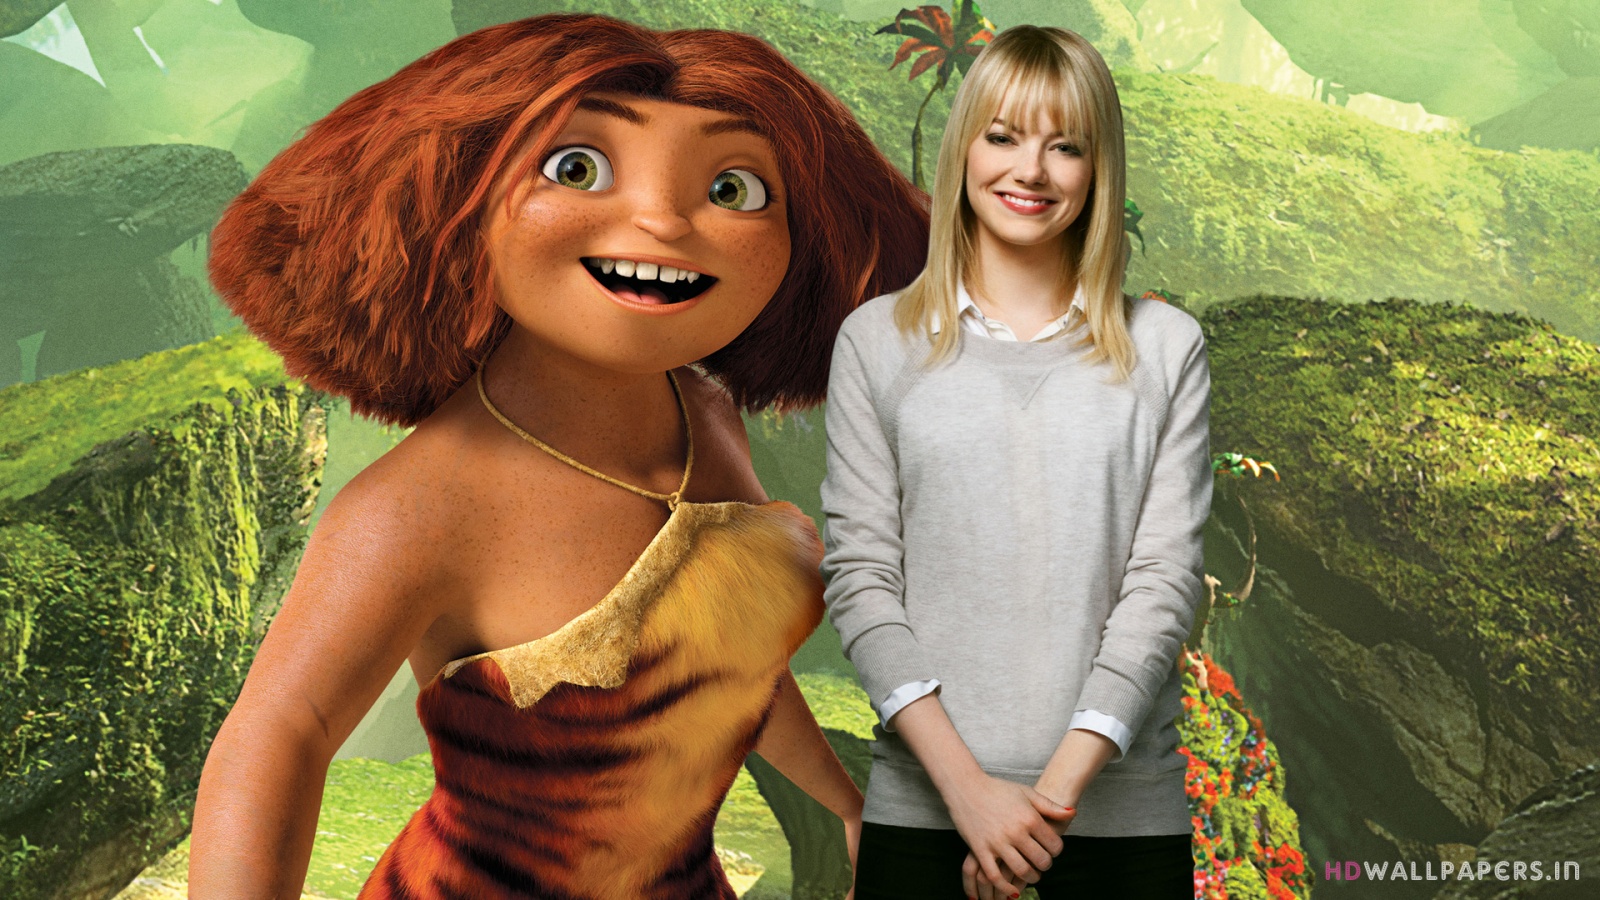 Emma Stone As Eep All For Desktop